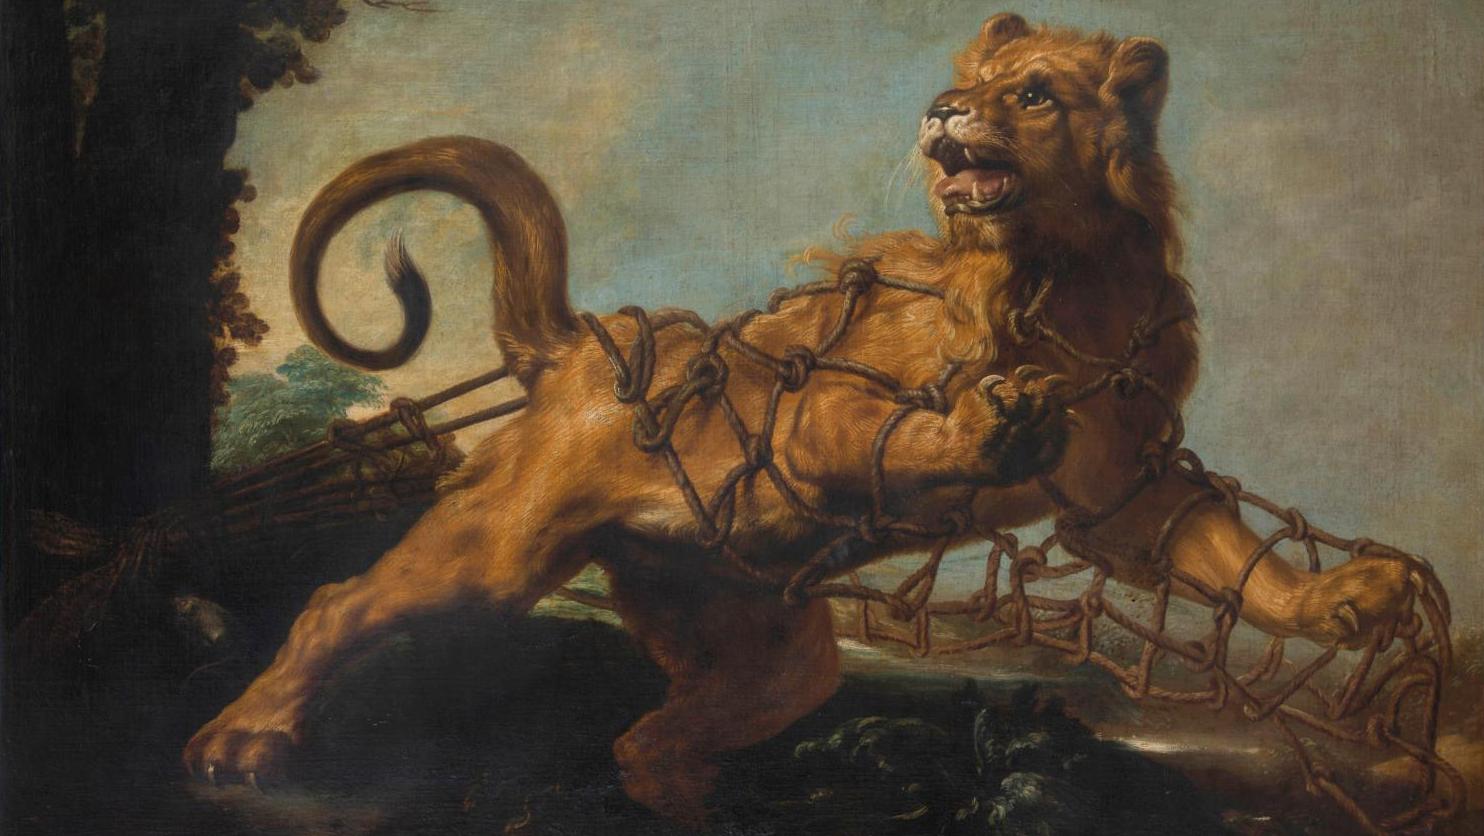 Attributed to Frans Snyders (1579-1657) and workshop, Fábula del león y el ratón... The Lion and the Rat According to Frans Snyders